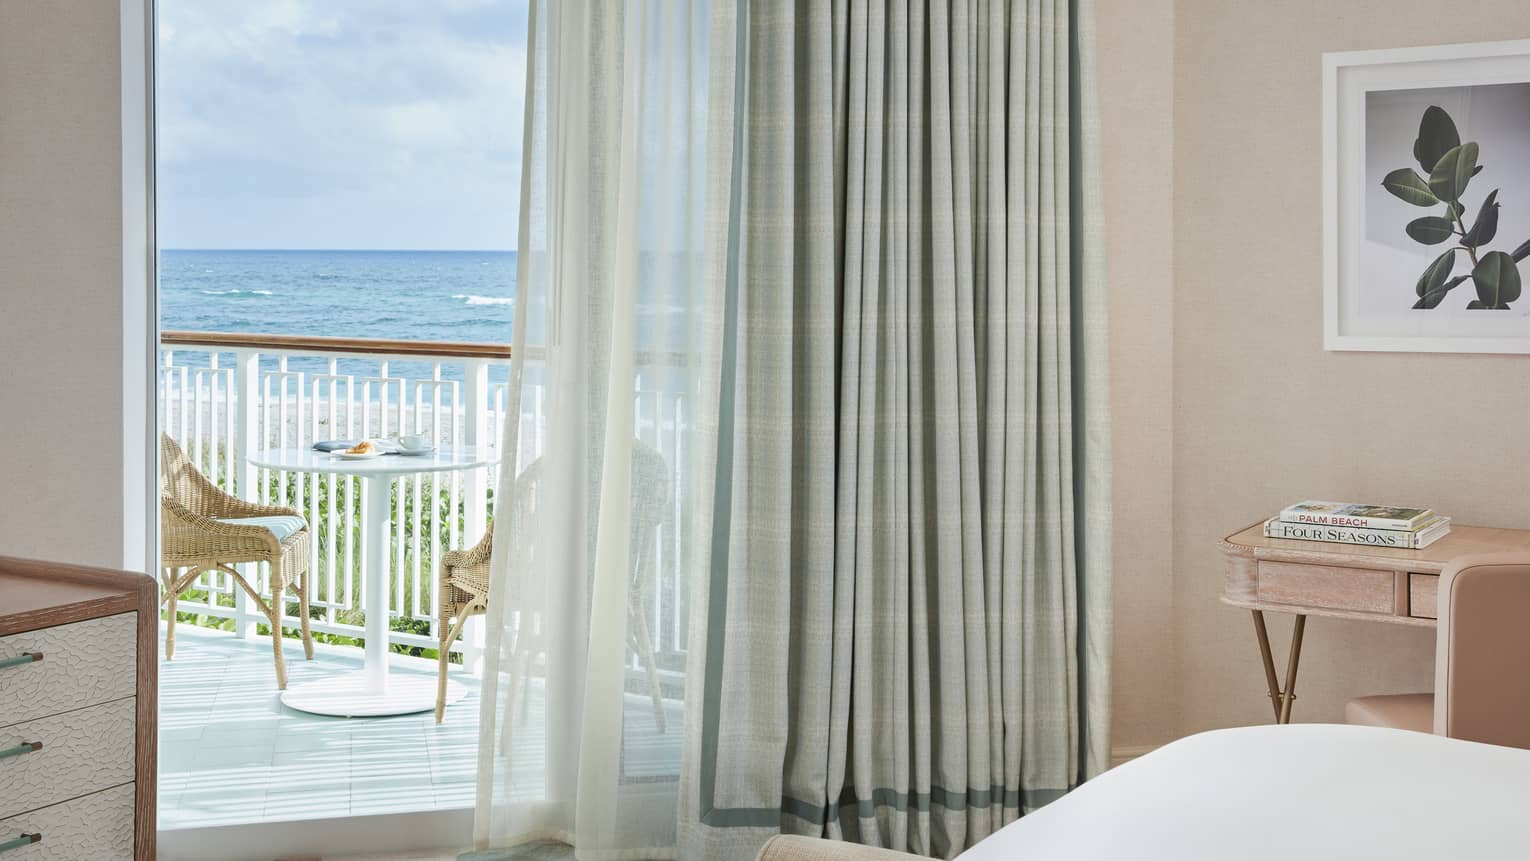 View of a guest room, looking out to private balcony with ocean views